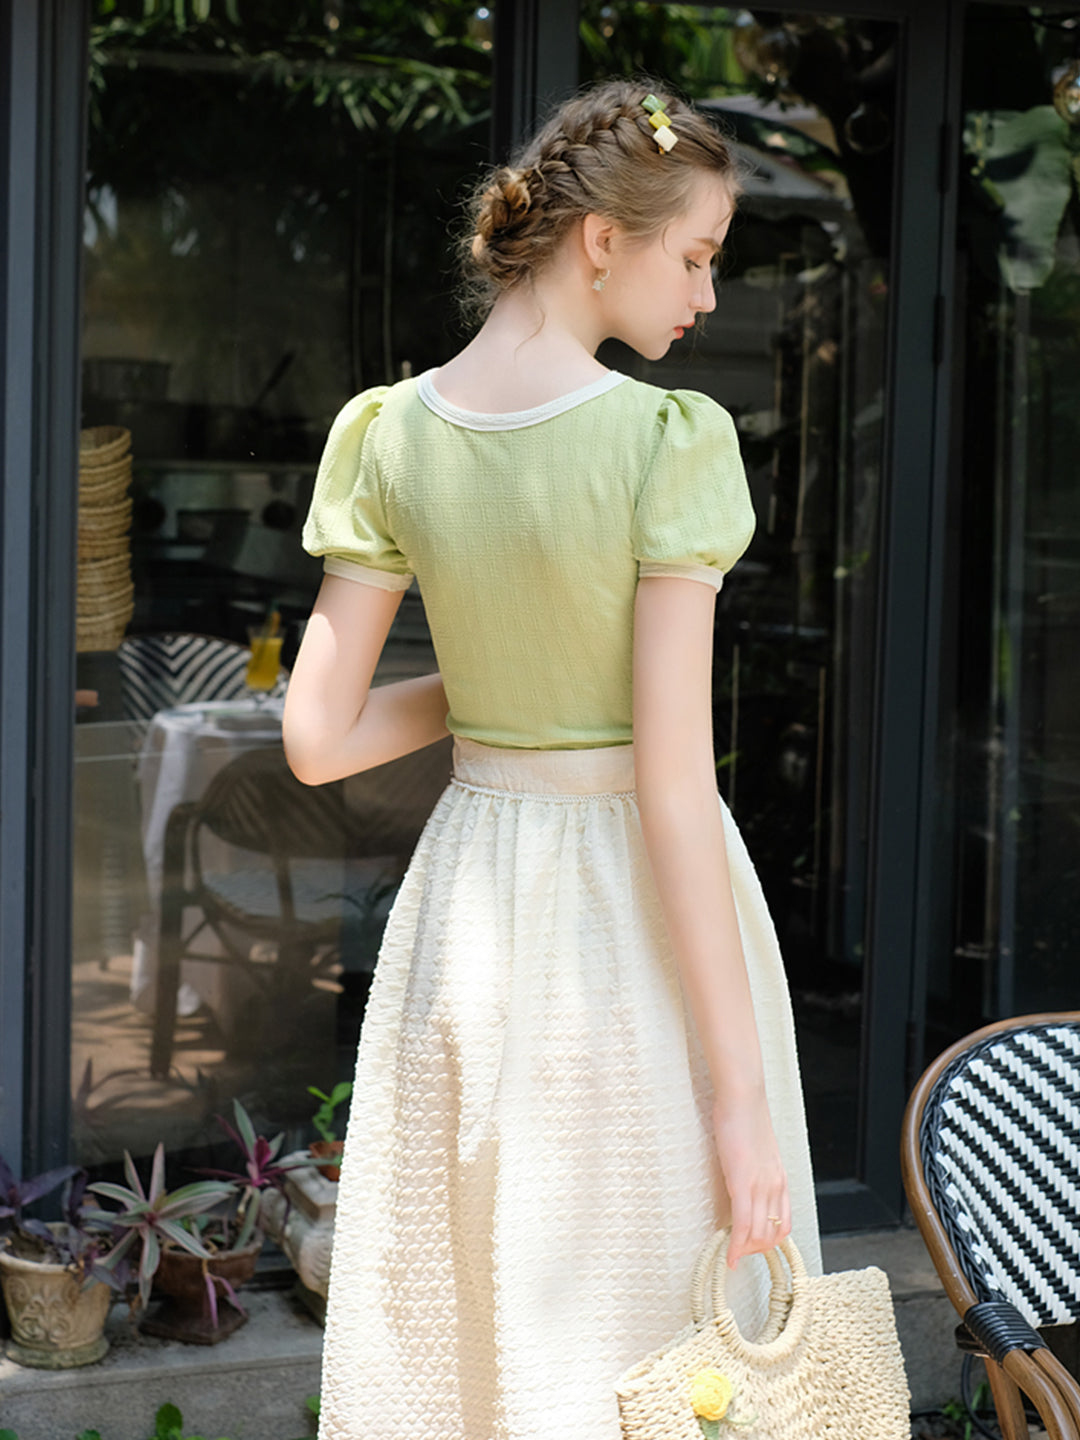 Kaylee French Avocado Green Color French Bow Vintage Top